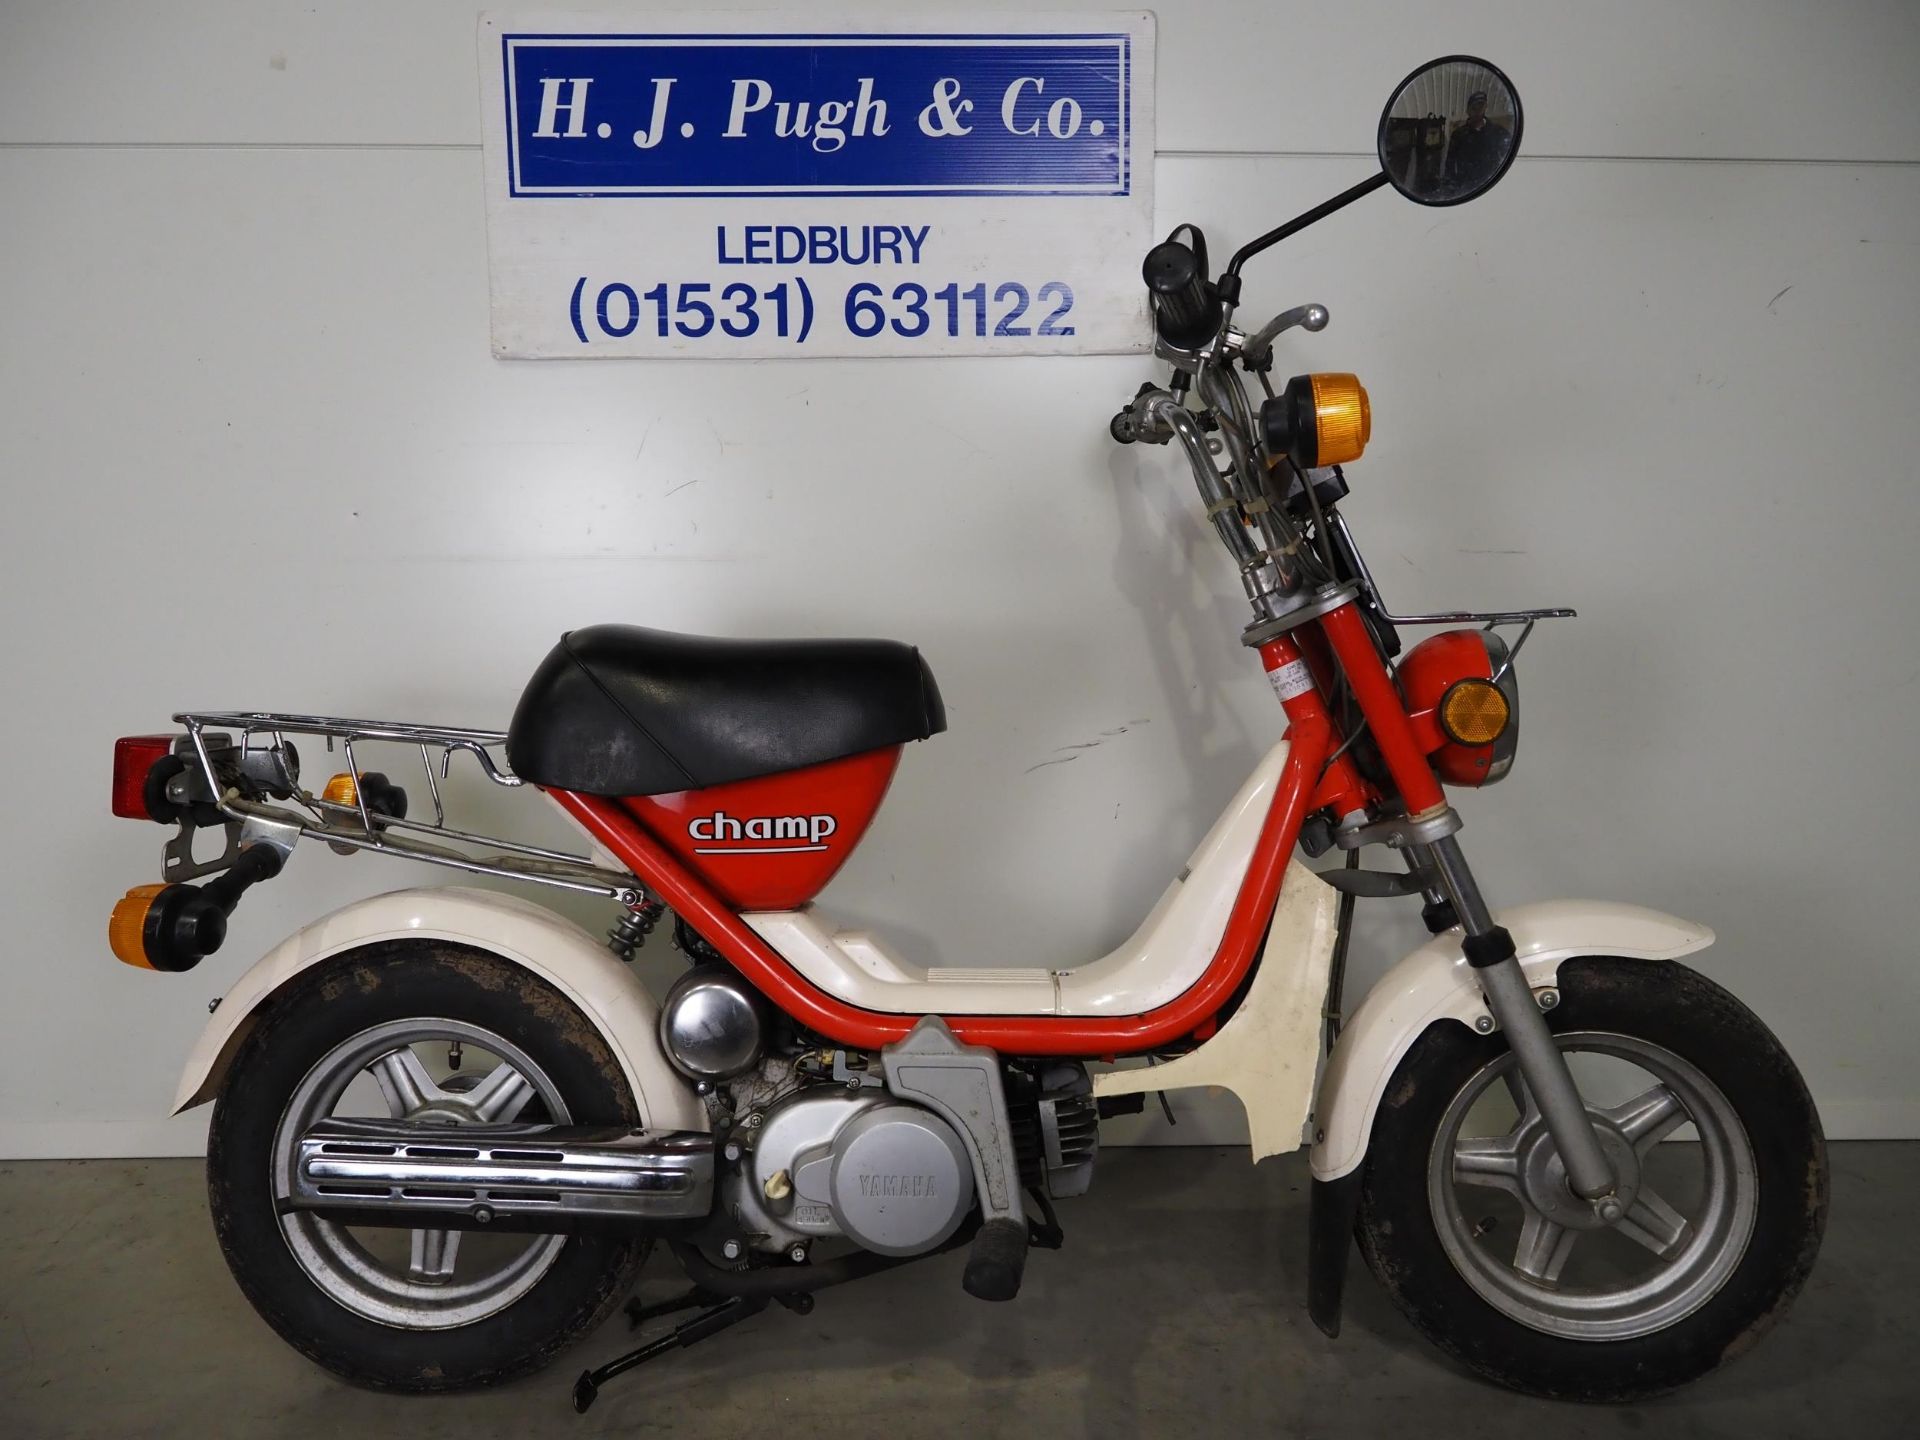 Yamaha Champ 50 moped. 1981. 50cc. Showing 23 miles from new. Has Nova number. Runs but requires - Image 2 of 5